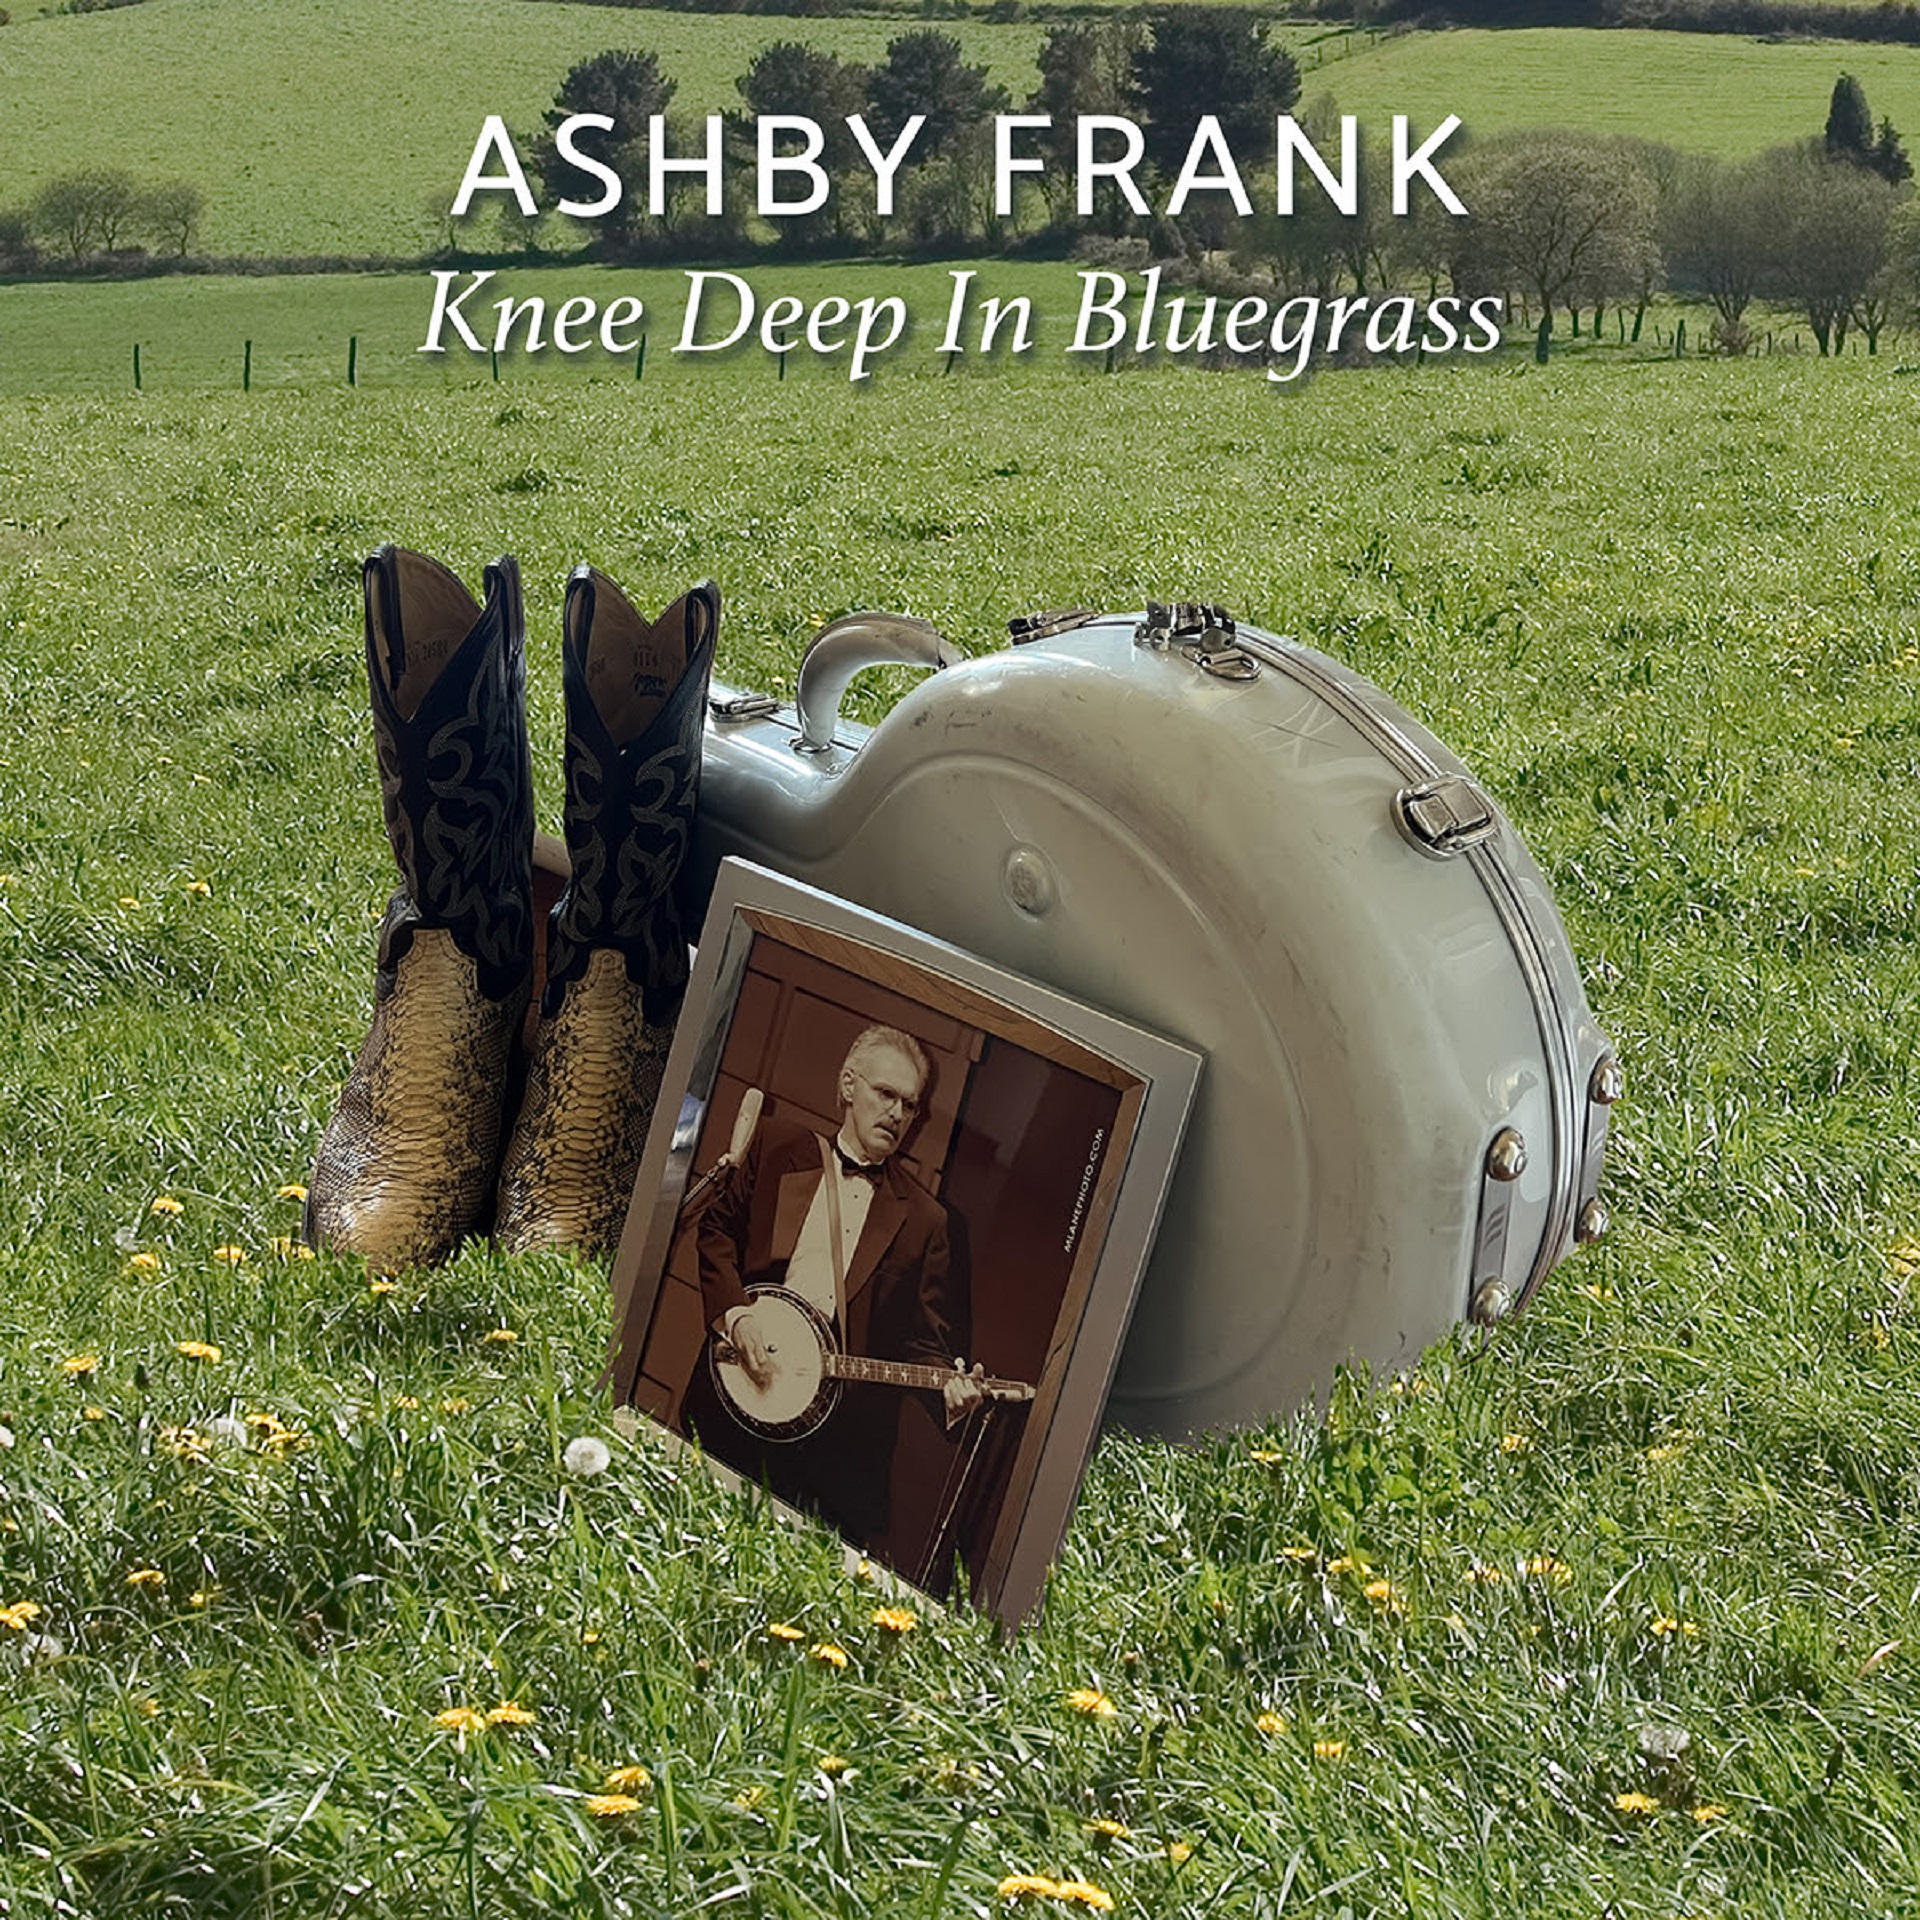 Ashby Frank’s “Knee Deep In Bluegrass” tops monthly radio chart